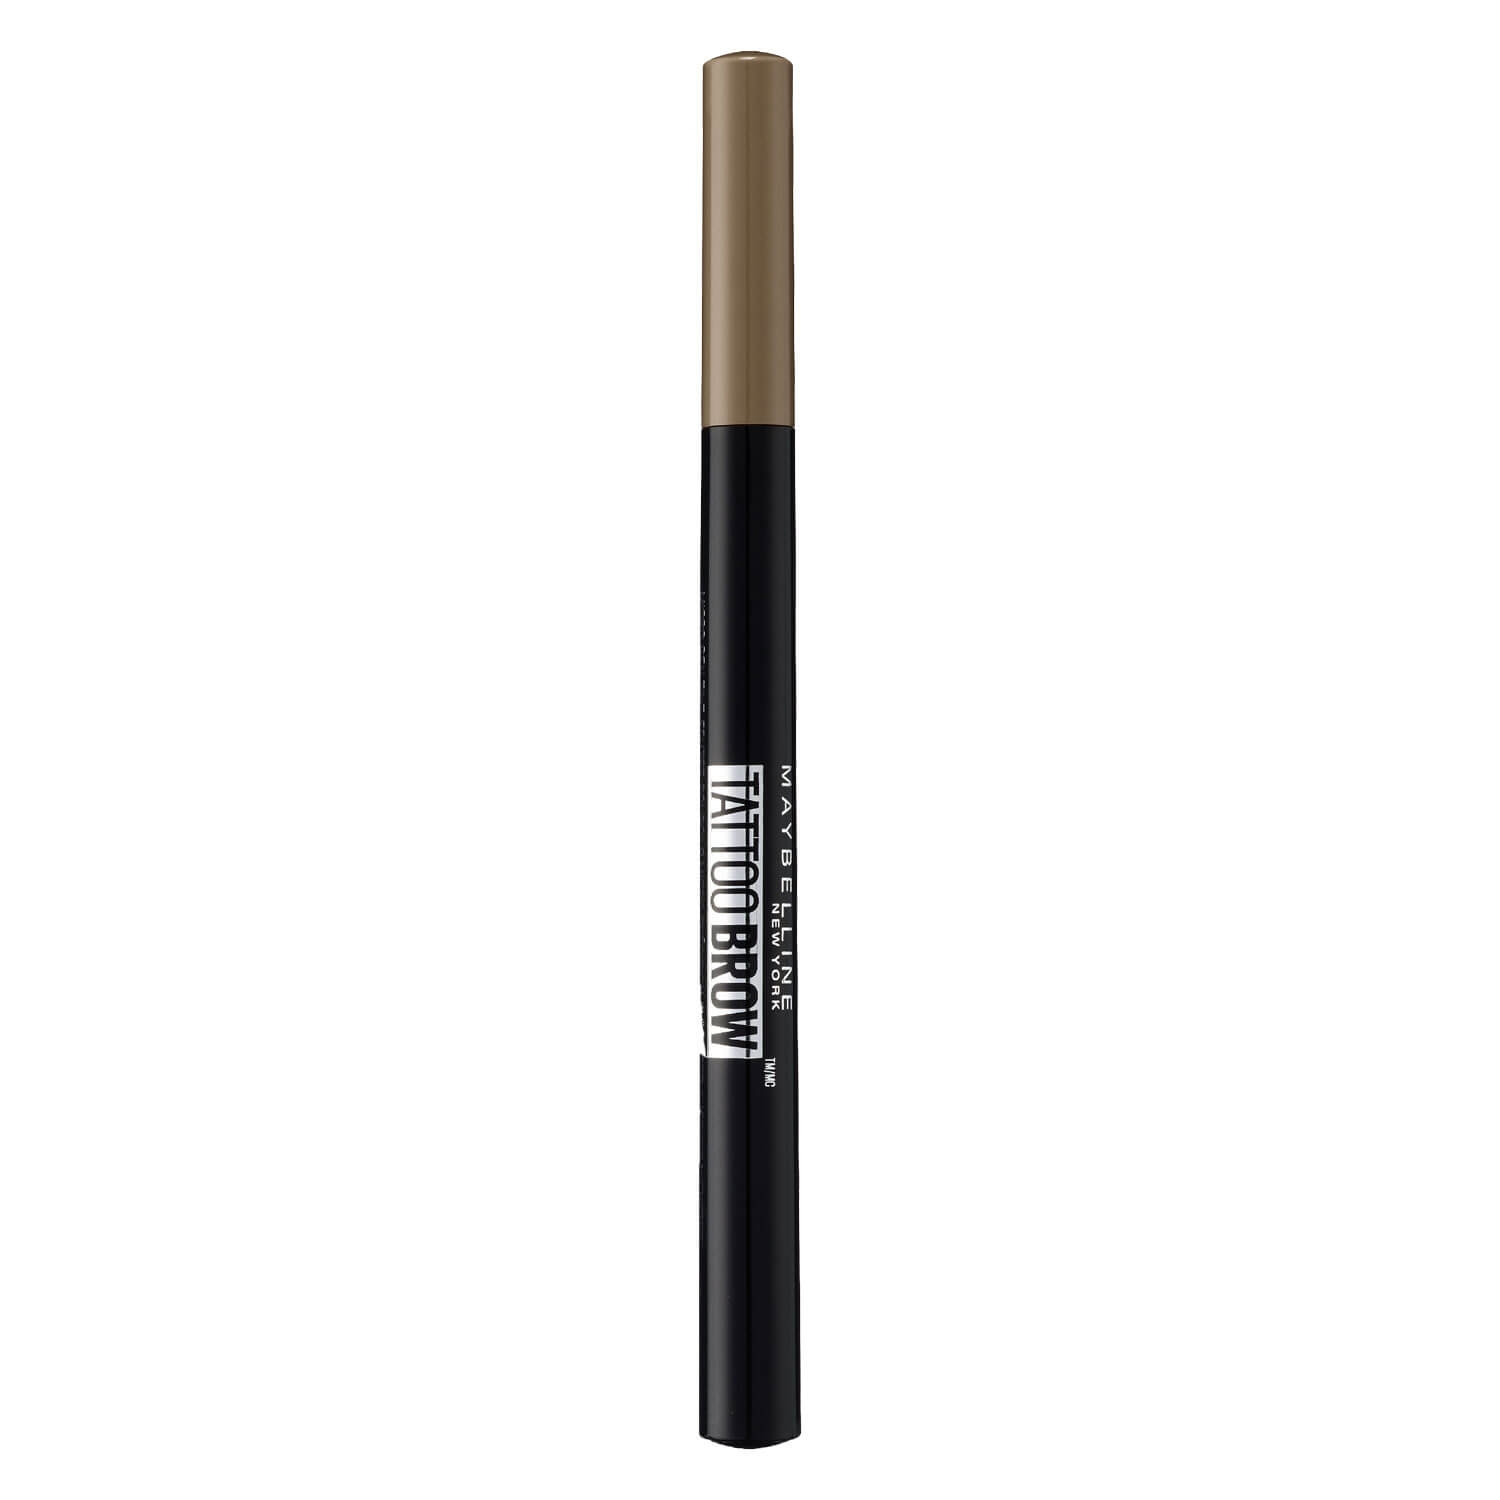 Product image from Maybelline NY Brows - Tattoo Brow Augenbrauenstift Nr. 120 Medium Brown